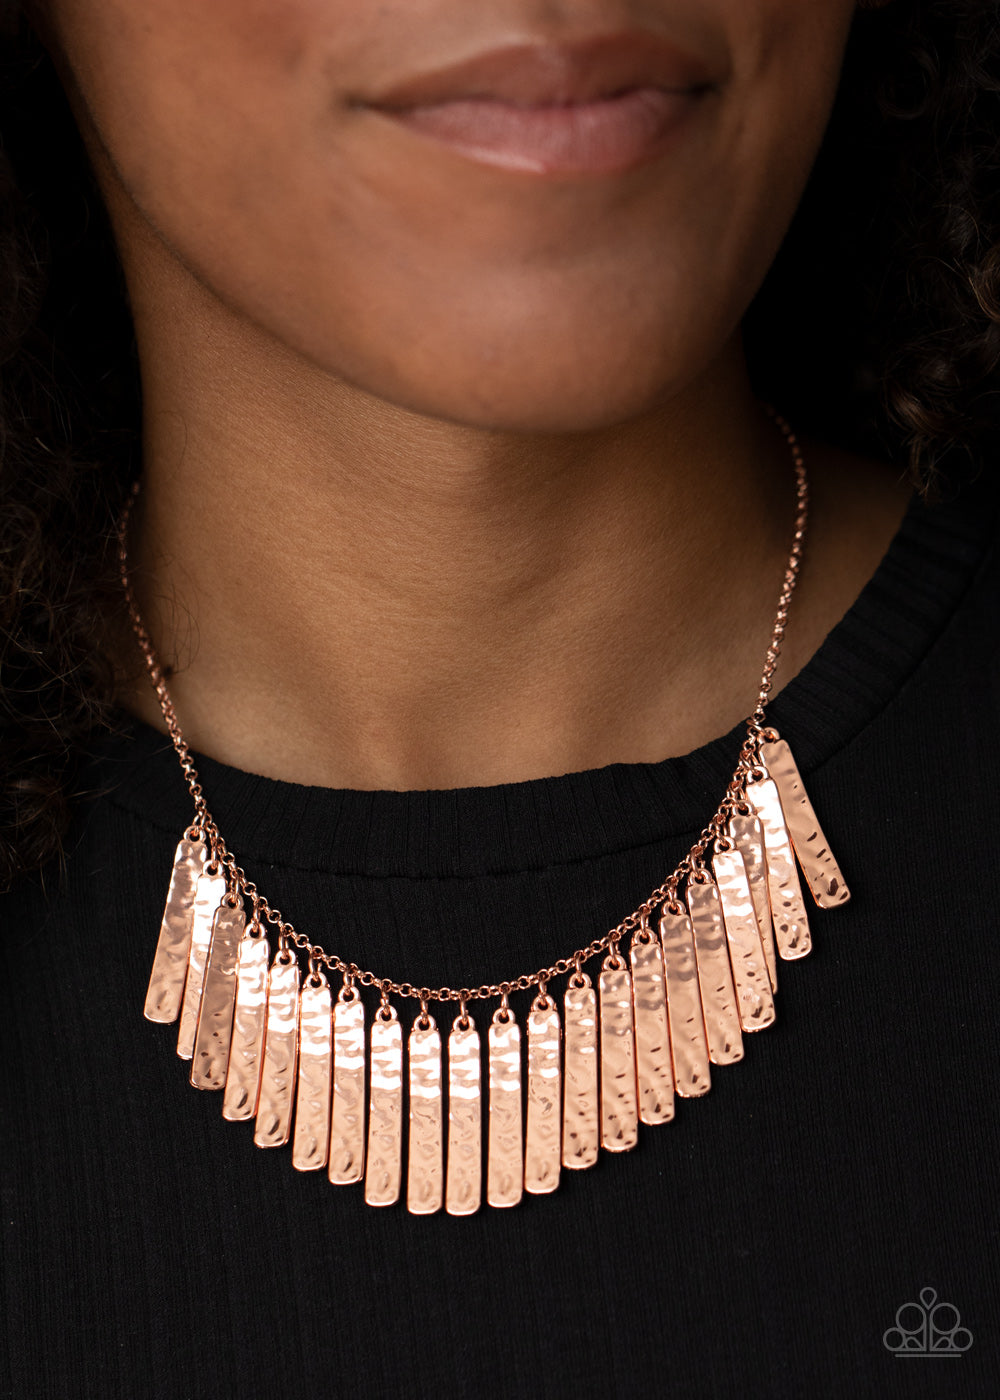 Metallic Muse Necklace - Copper